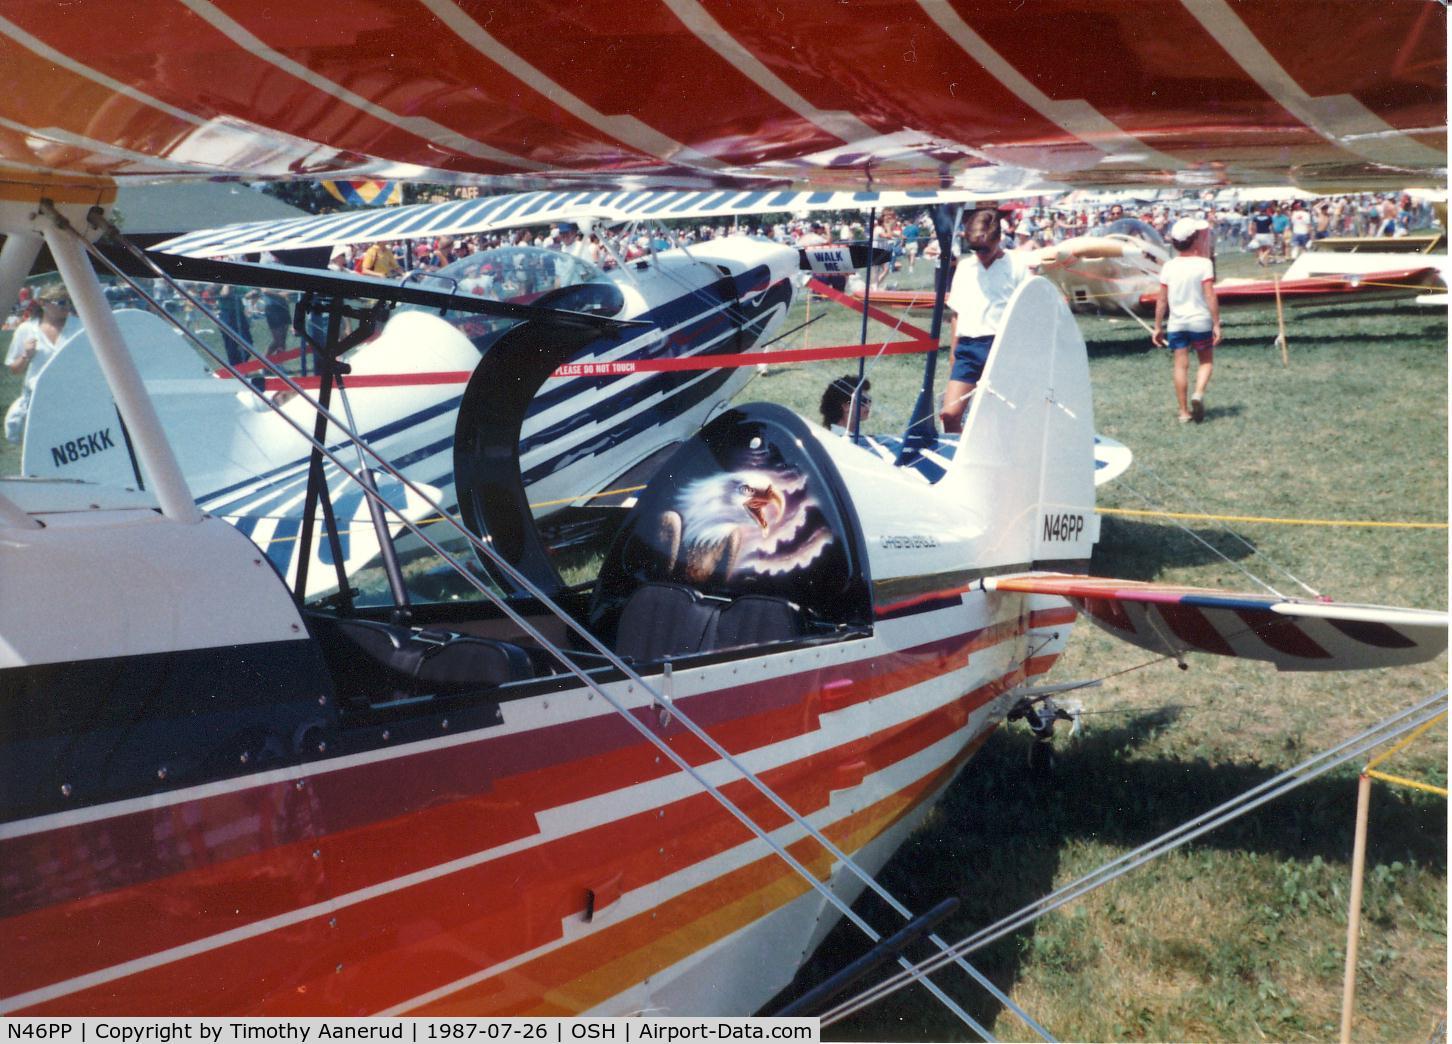 N46PP, Christen Eagle II C/N PETERSON-0001, Oshkosh 1987, was also featured in Sport Aviation